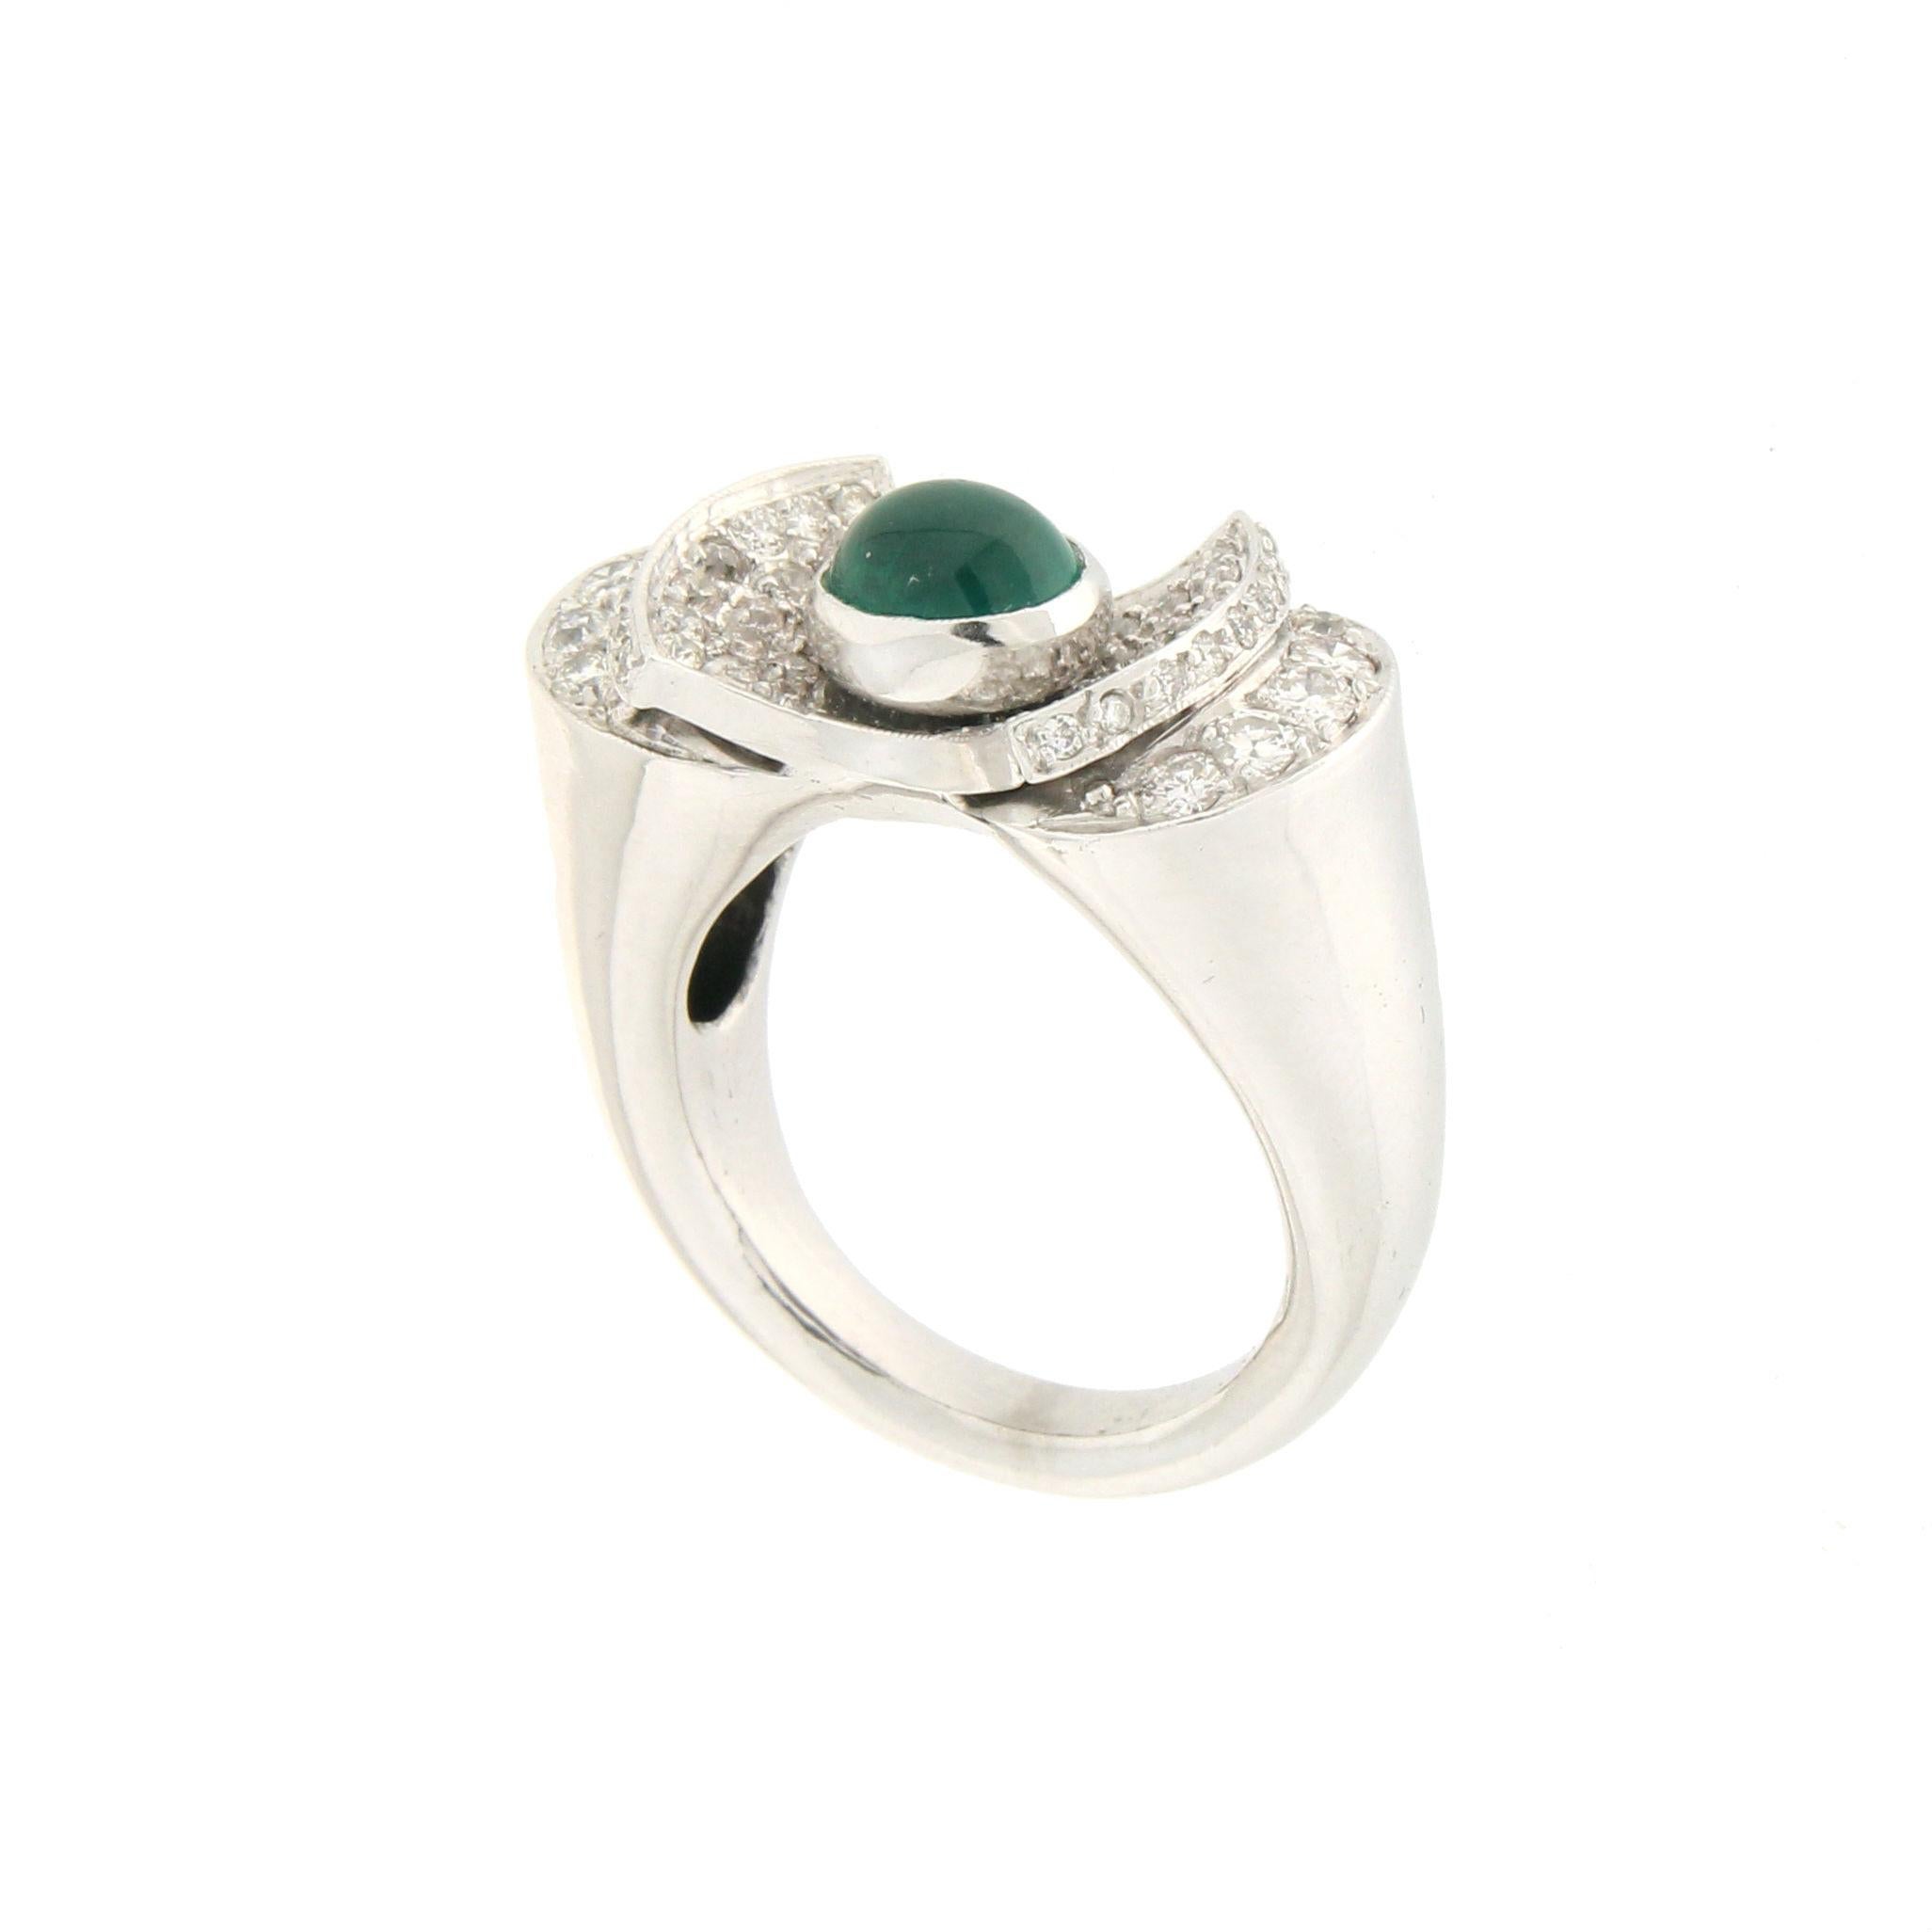 Handcraft Cabochon Emerald 18 Karat White Gold Diamonds Cocktail Ring In New Condition For Sale In Marcianise, IT